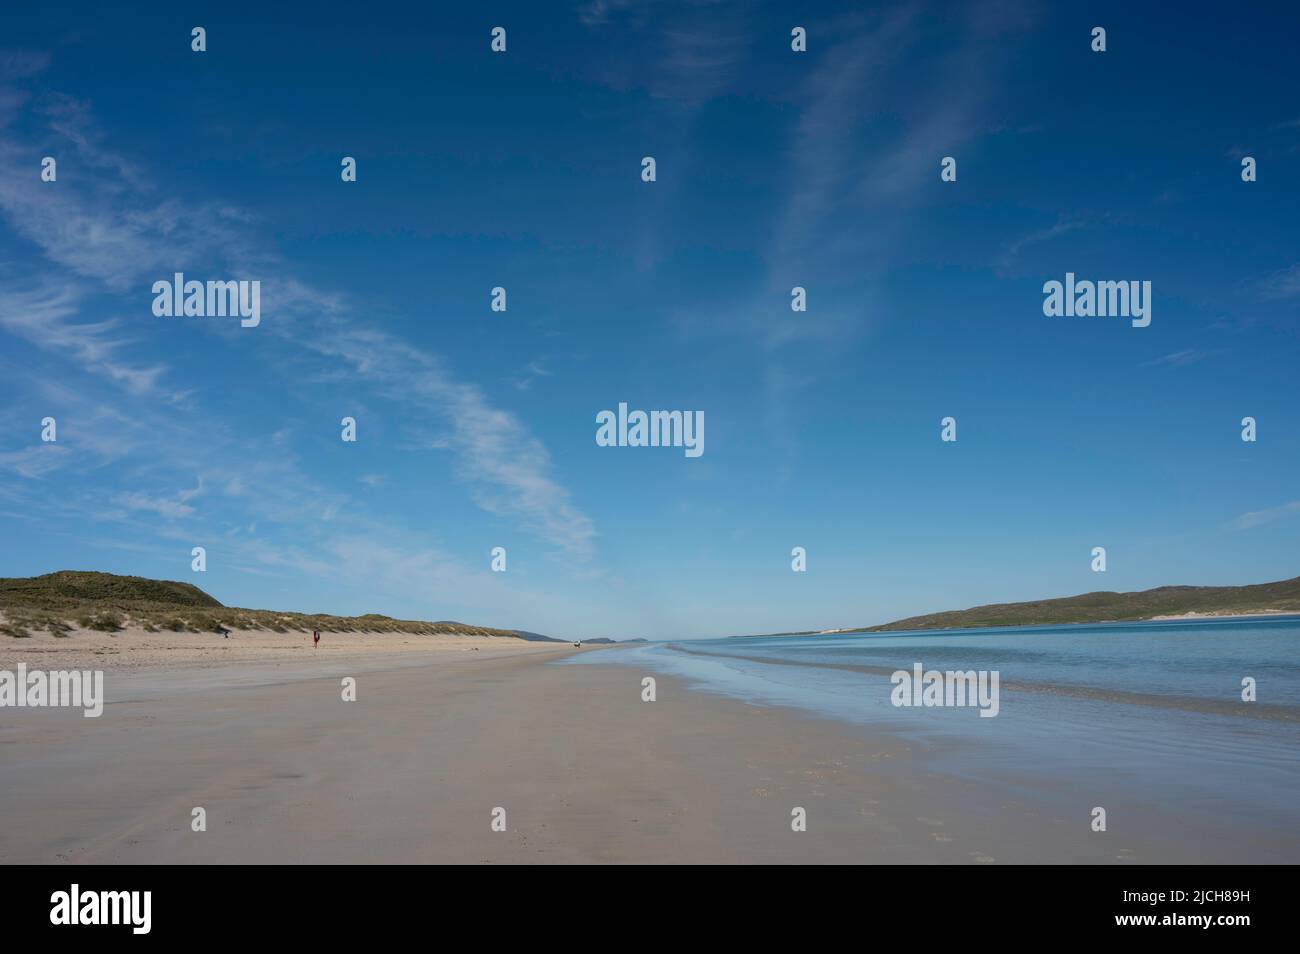 Luskentyre beach with sea and sand dunes. People on beach. Blue sky and light clouds, lots of copy space. Stock Photo